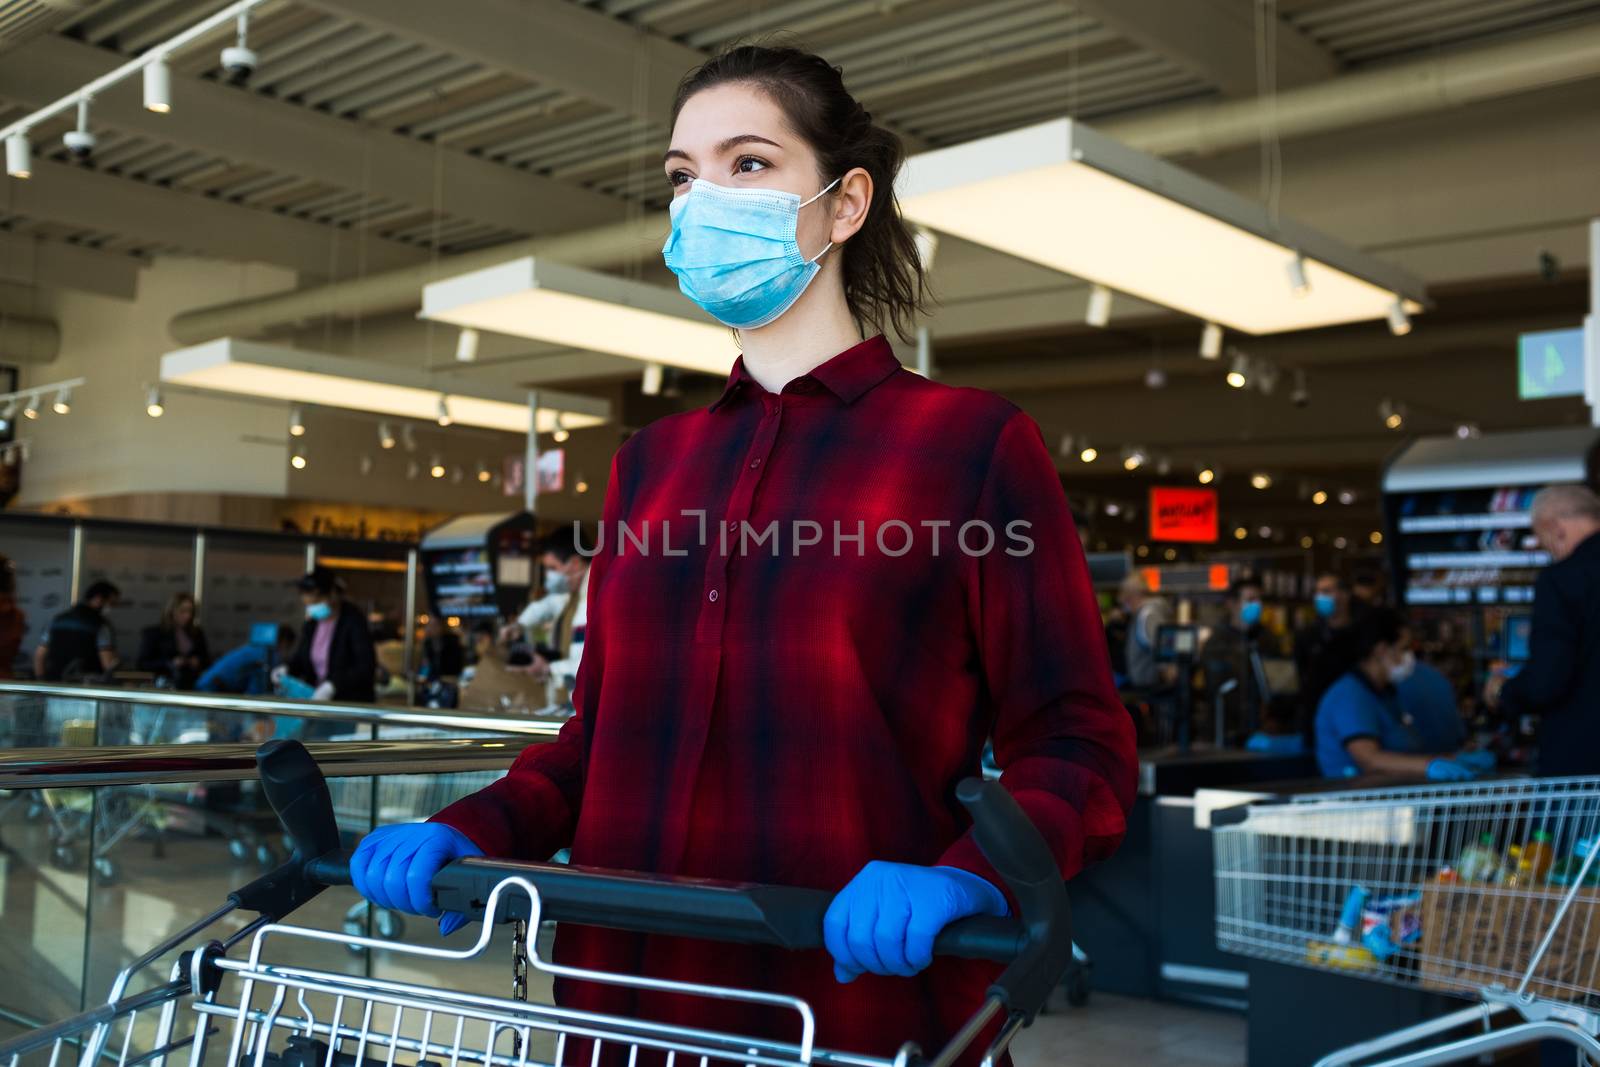 Business as usual,open again as normal,new norm for everyday activities after COVID-19 Coronavirus pandemic end,obligatory personal protective equipment,face mask,gloves.Female shopper pushing trolley